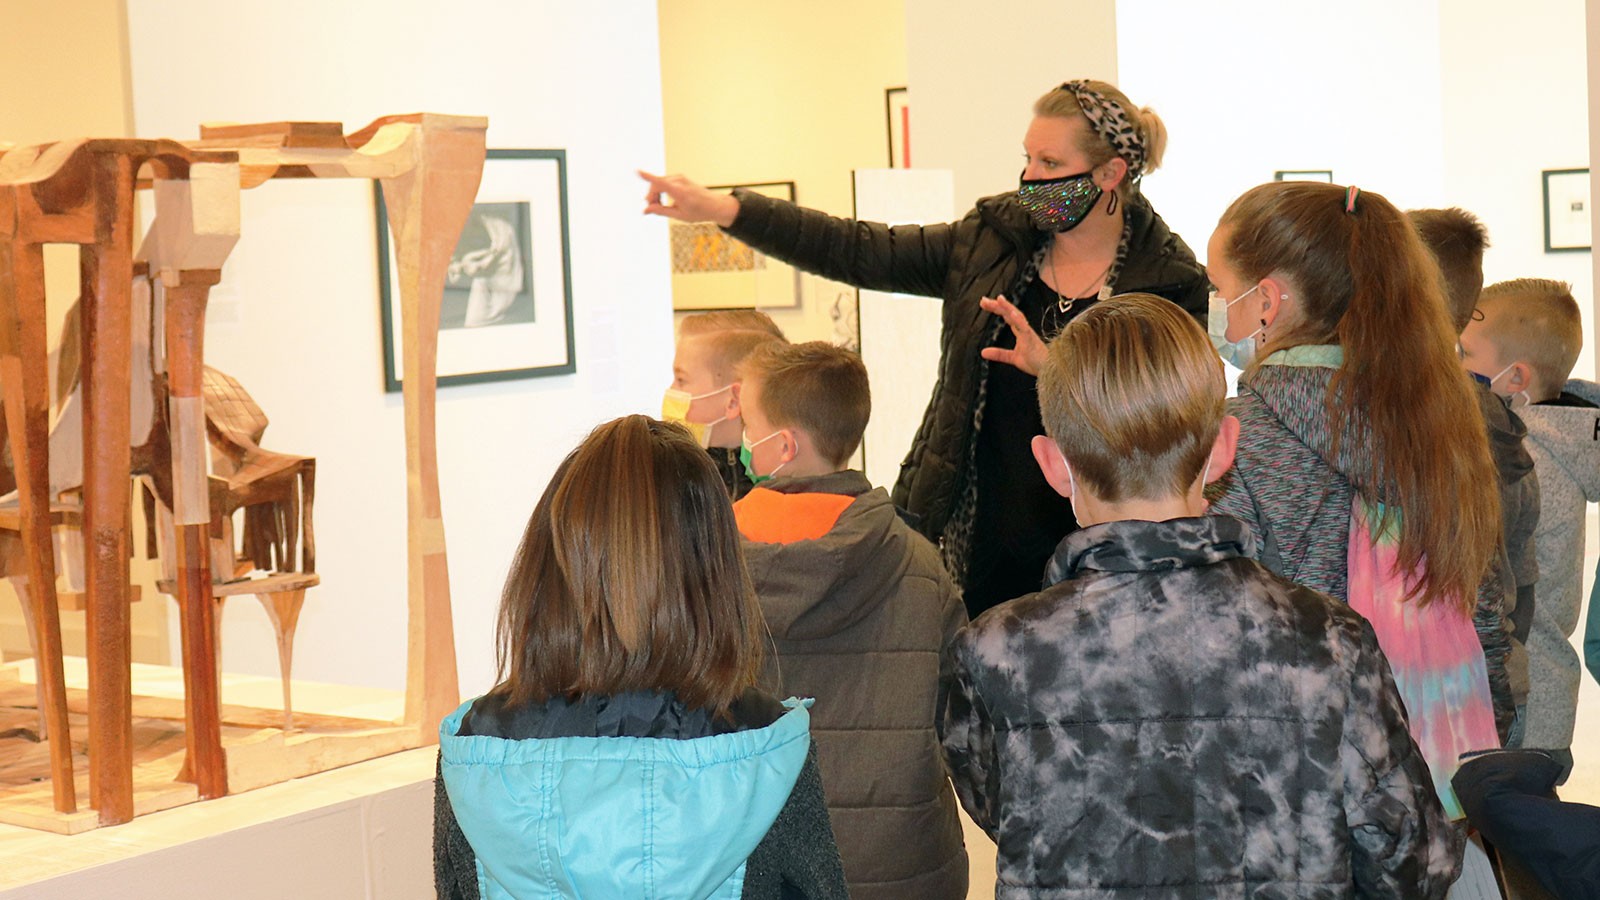 A woman shows fourth-graders abstract wooden sculptures during a USU art museum tour.